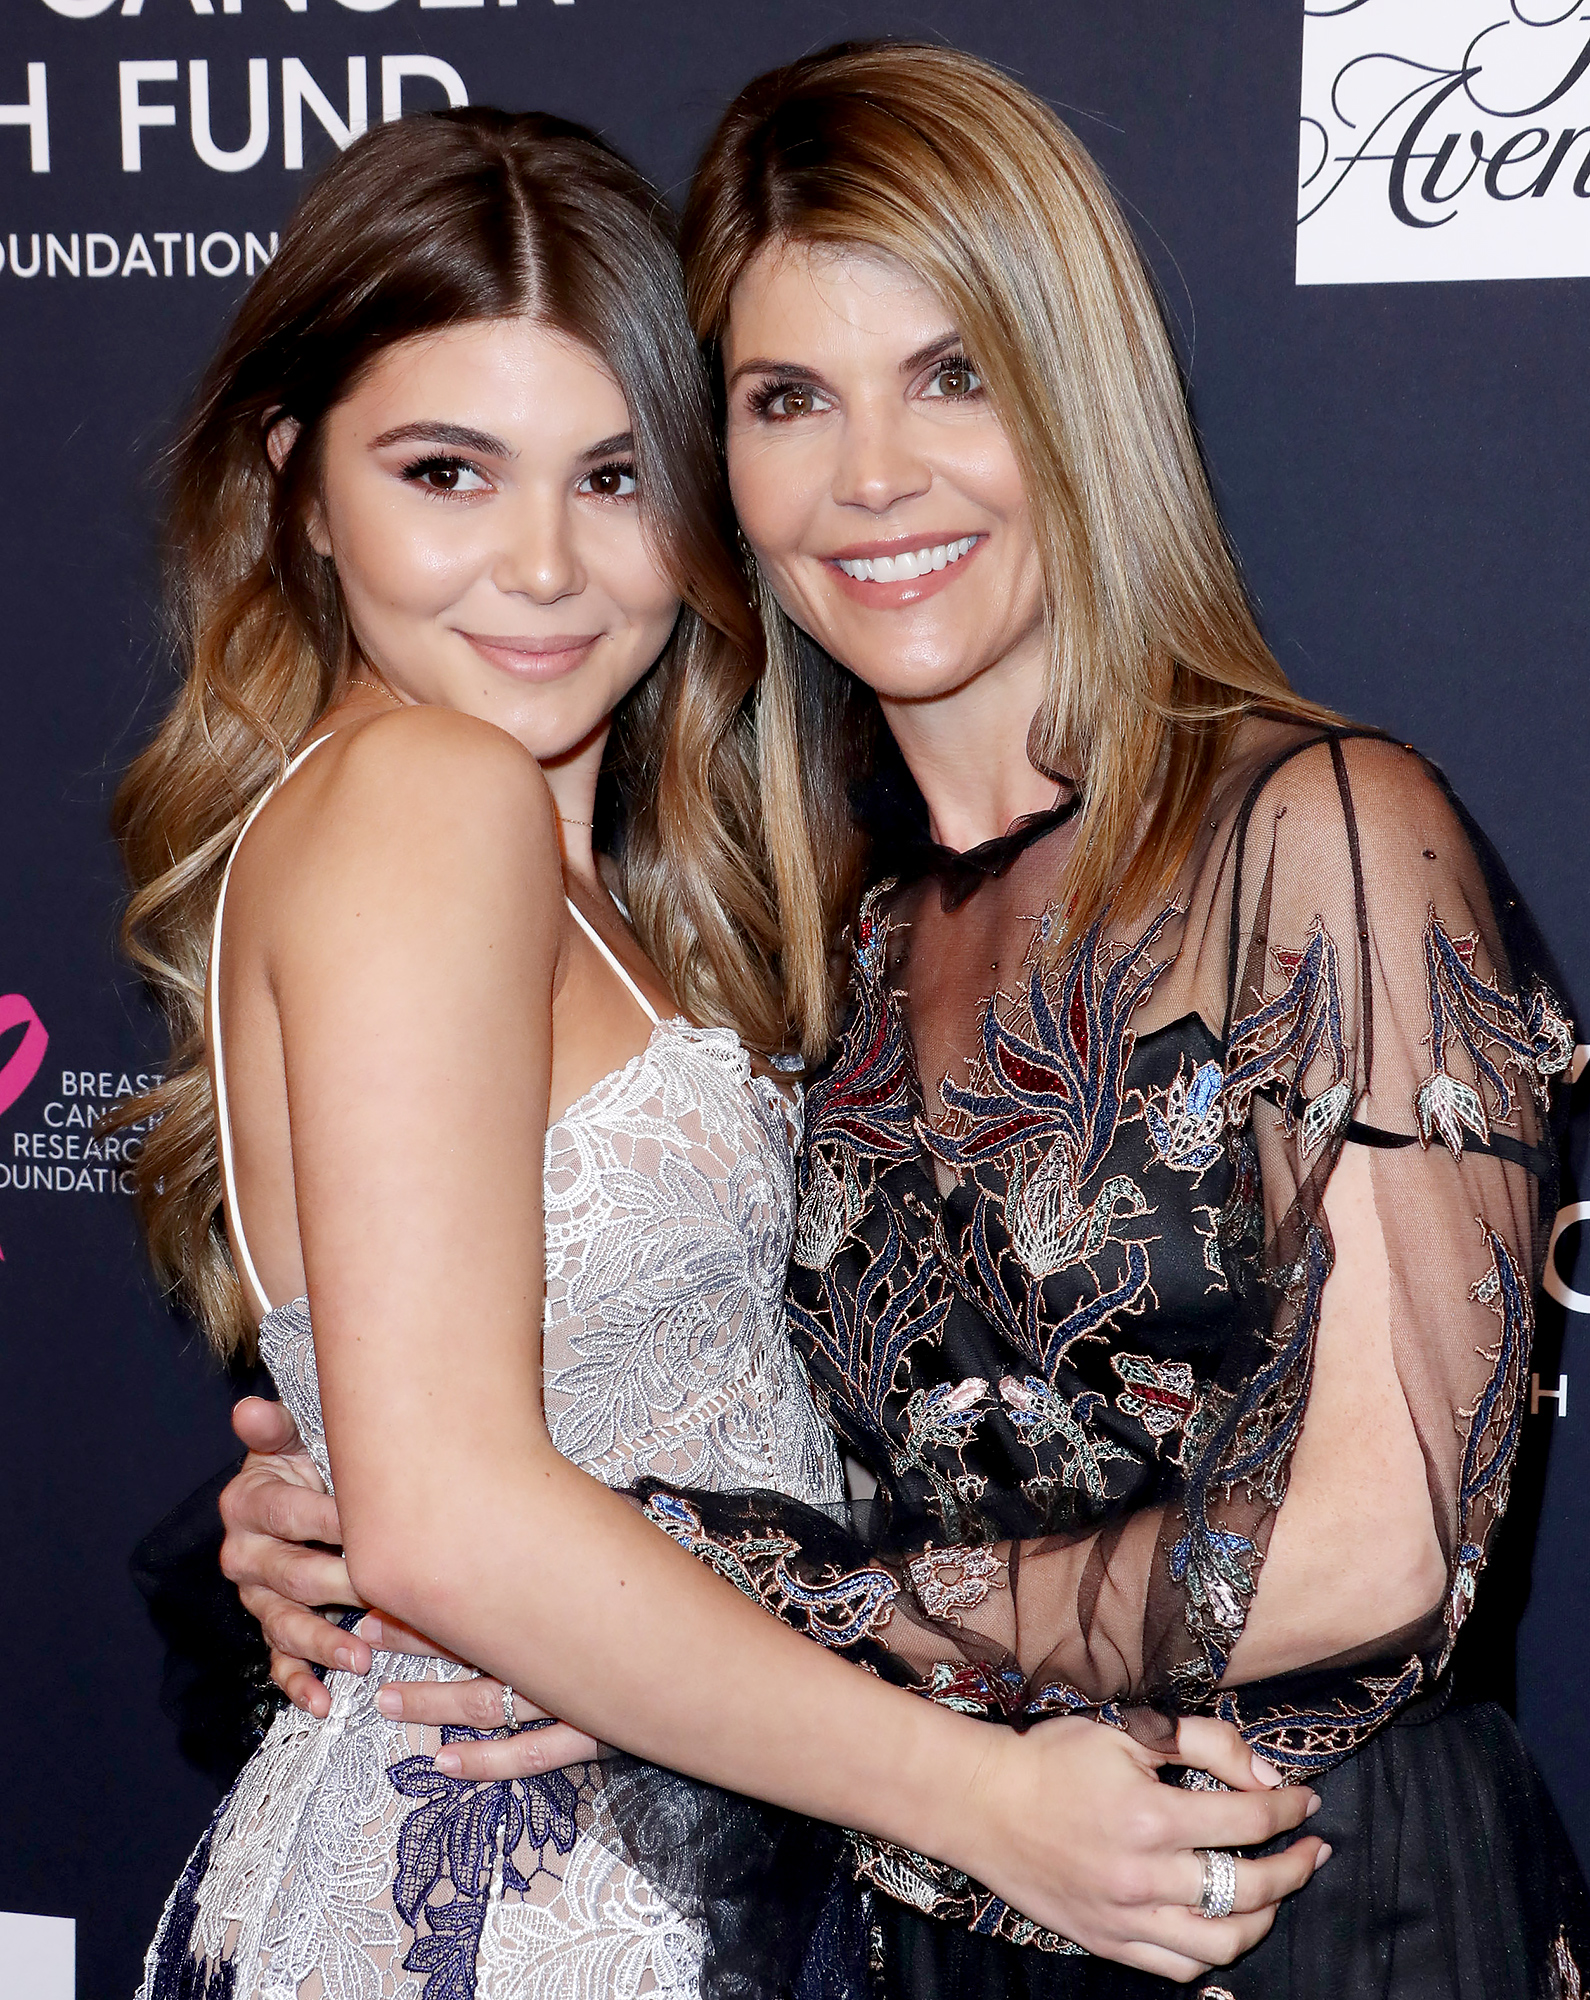 Lisa Rinna Throws Shade at Lori Loughlin and Olivia Jade Giannulli Over College Scandal 1